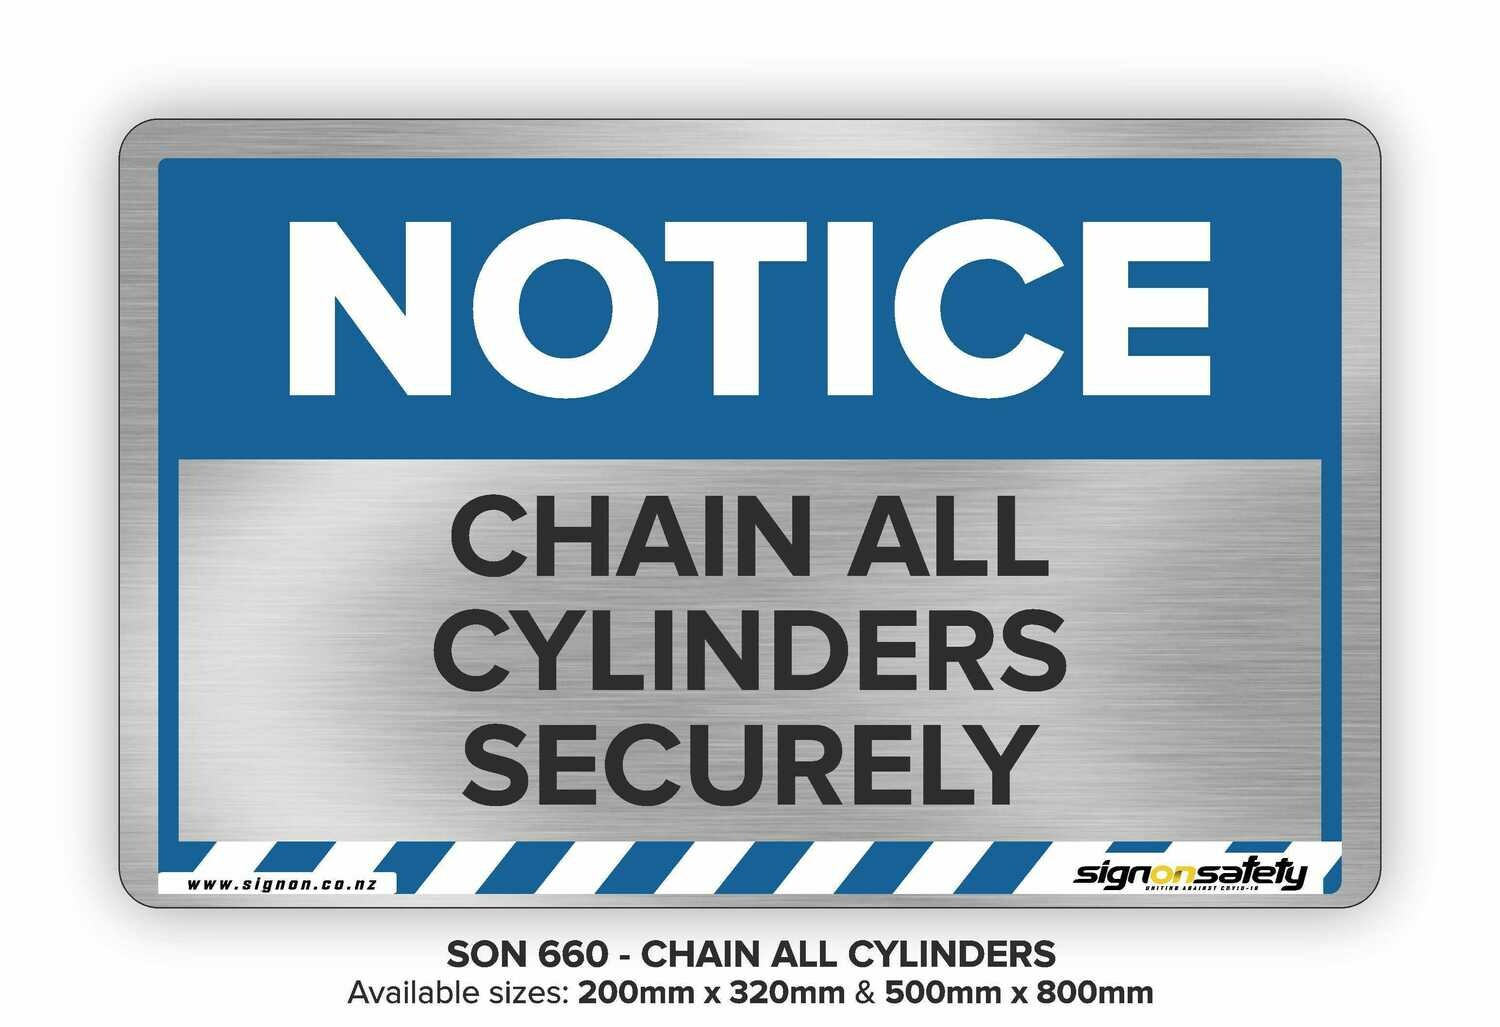 Notice - Chain All Cylinders Securely